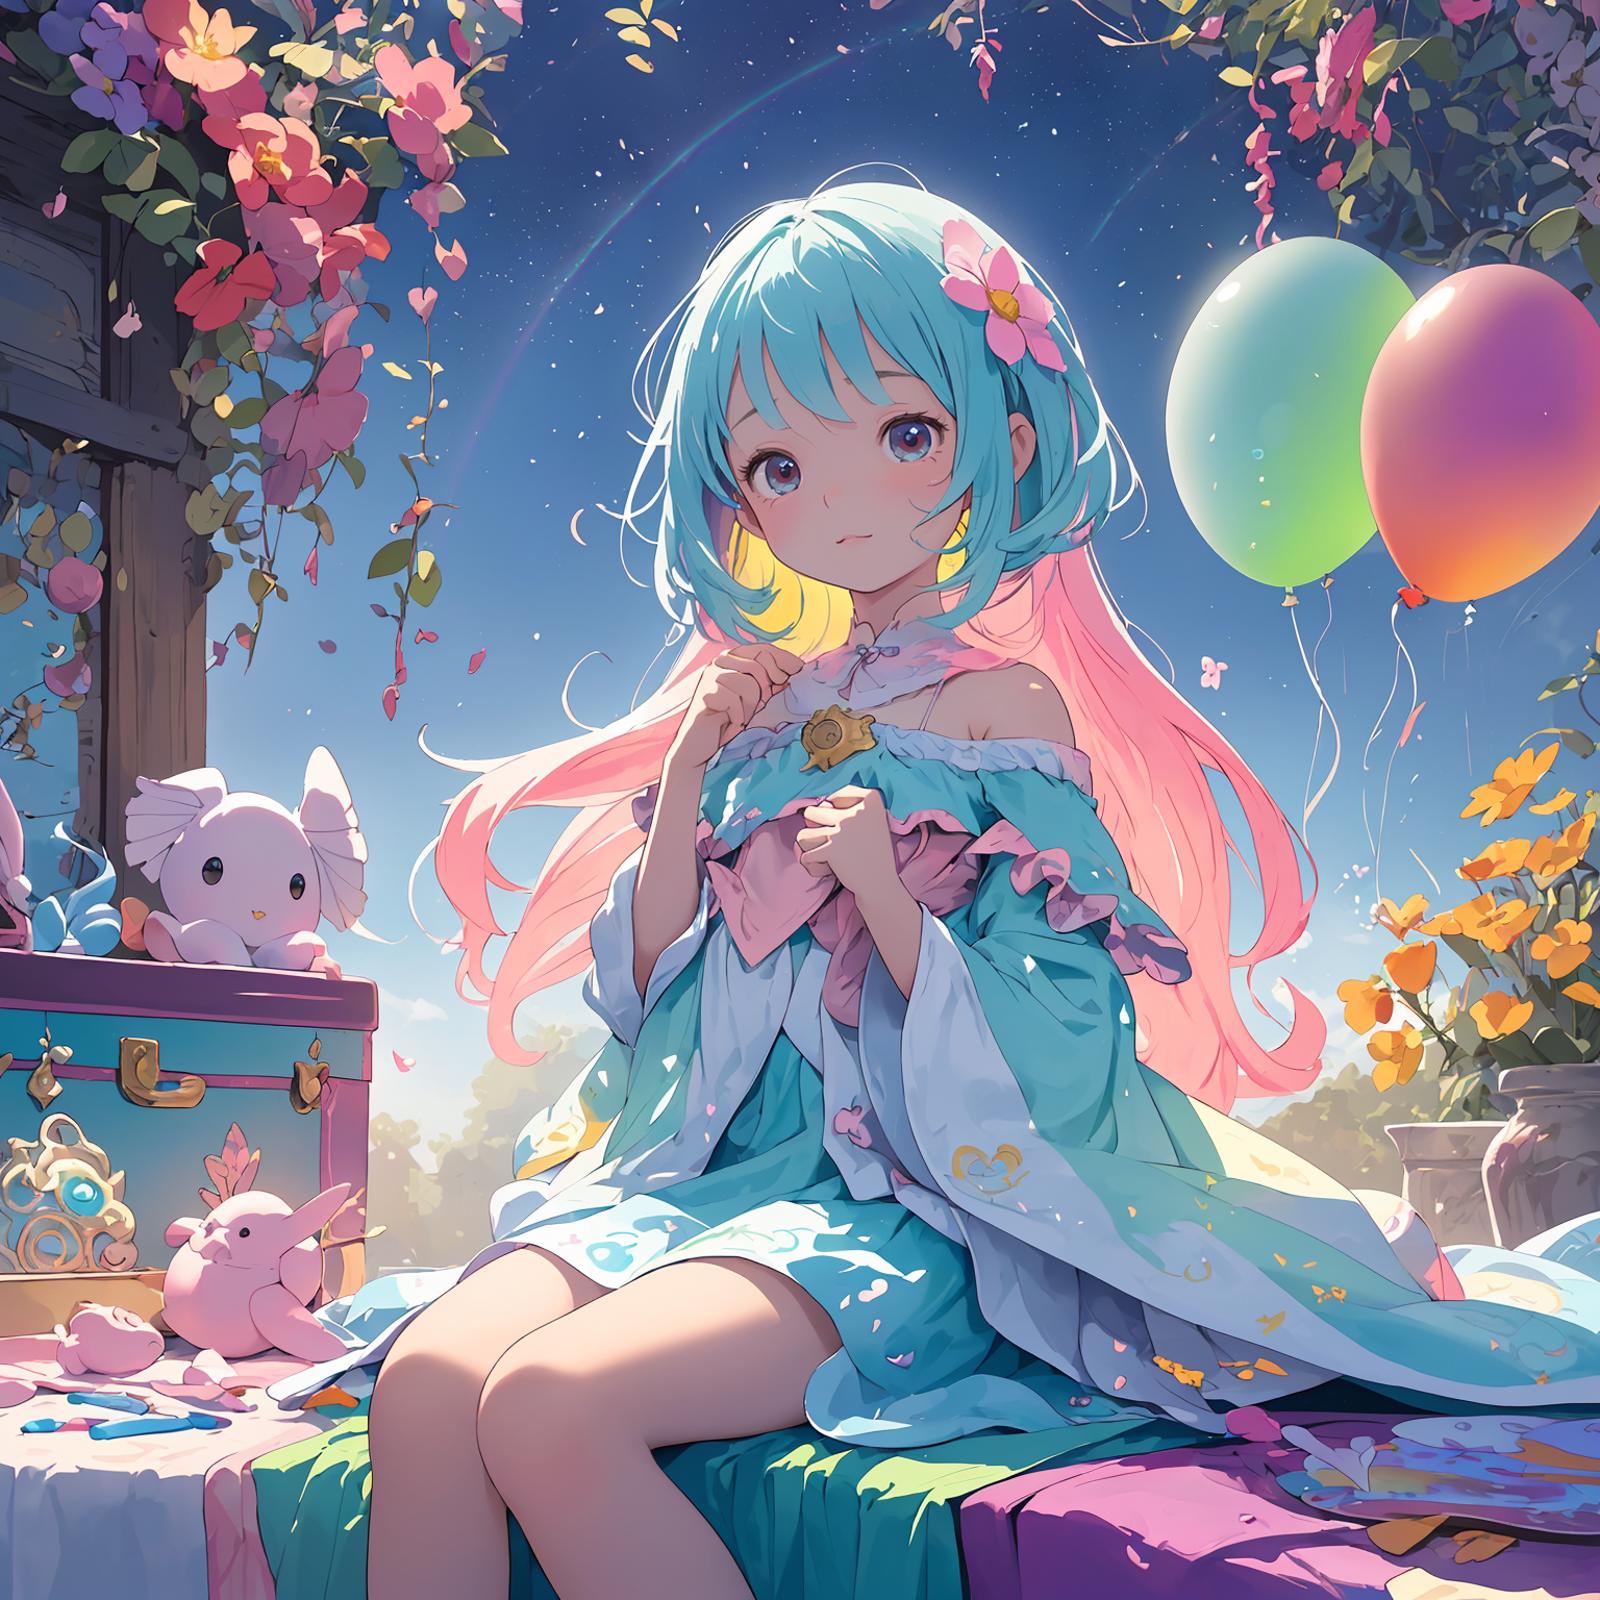 Anime-inspired illustration of a girl in a blue dress sitting on a bed with stuffed animals.